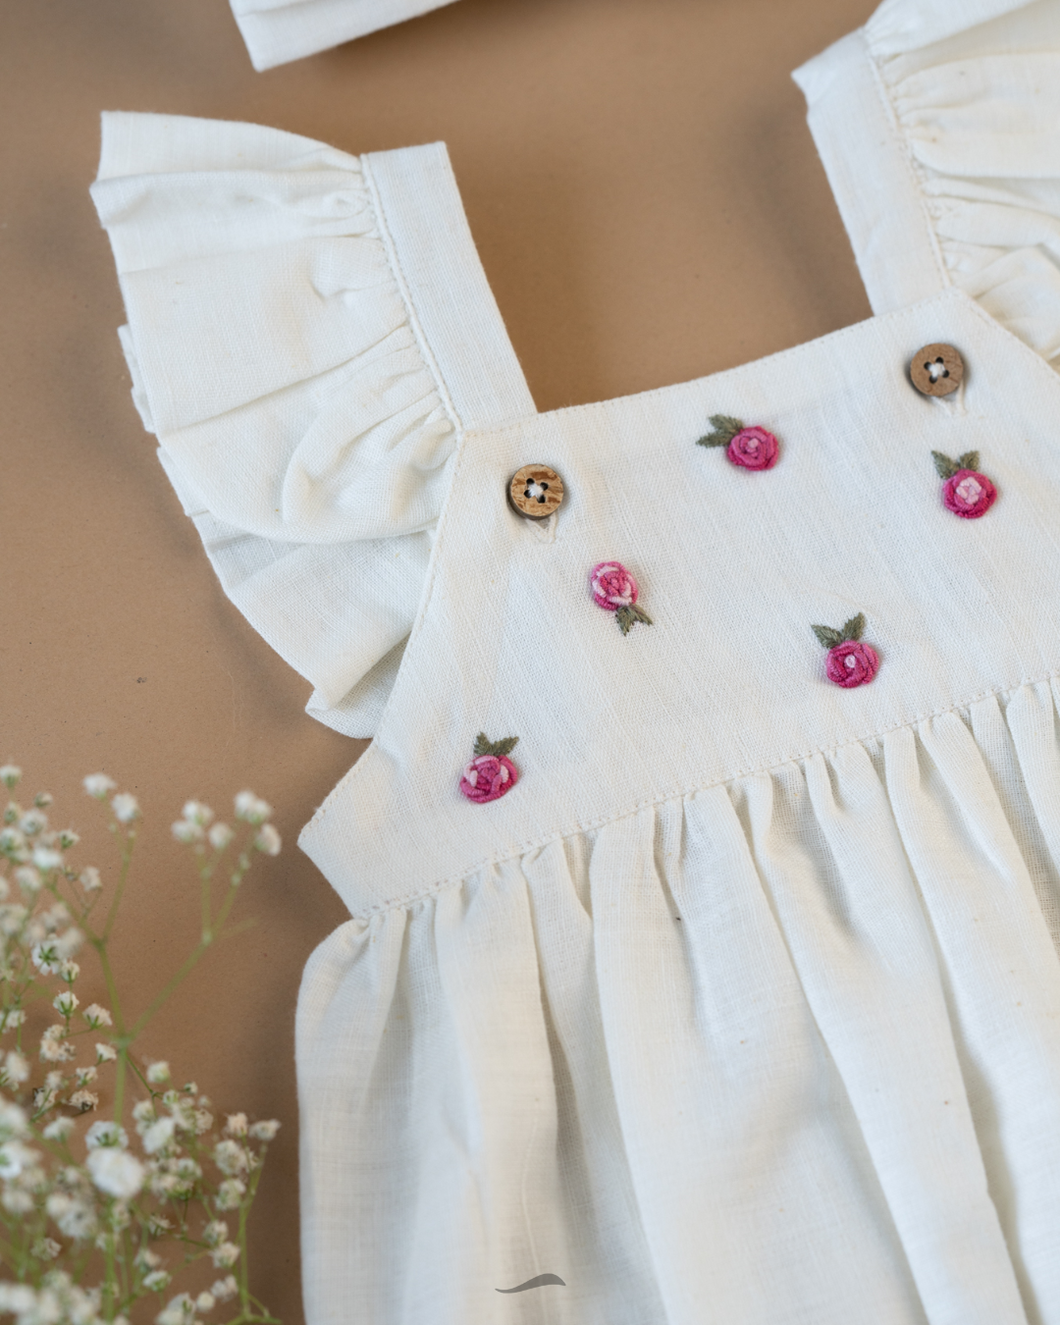 A cute romper with some flower embroidery on it with some flower aside.